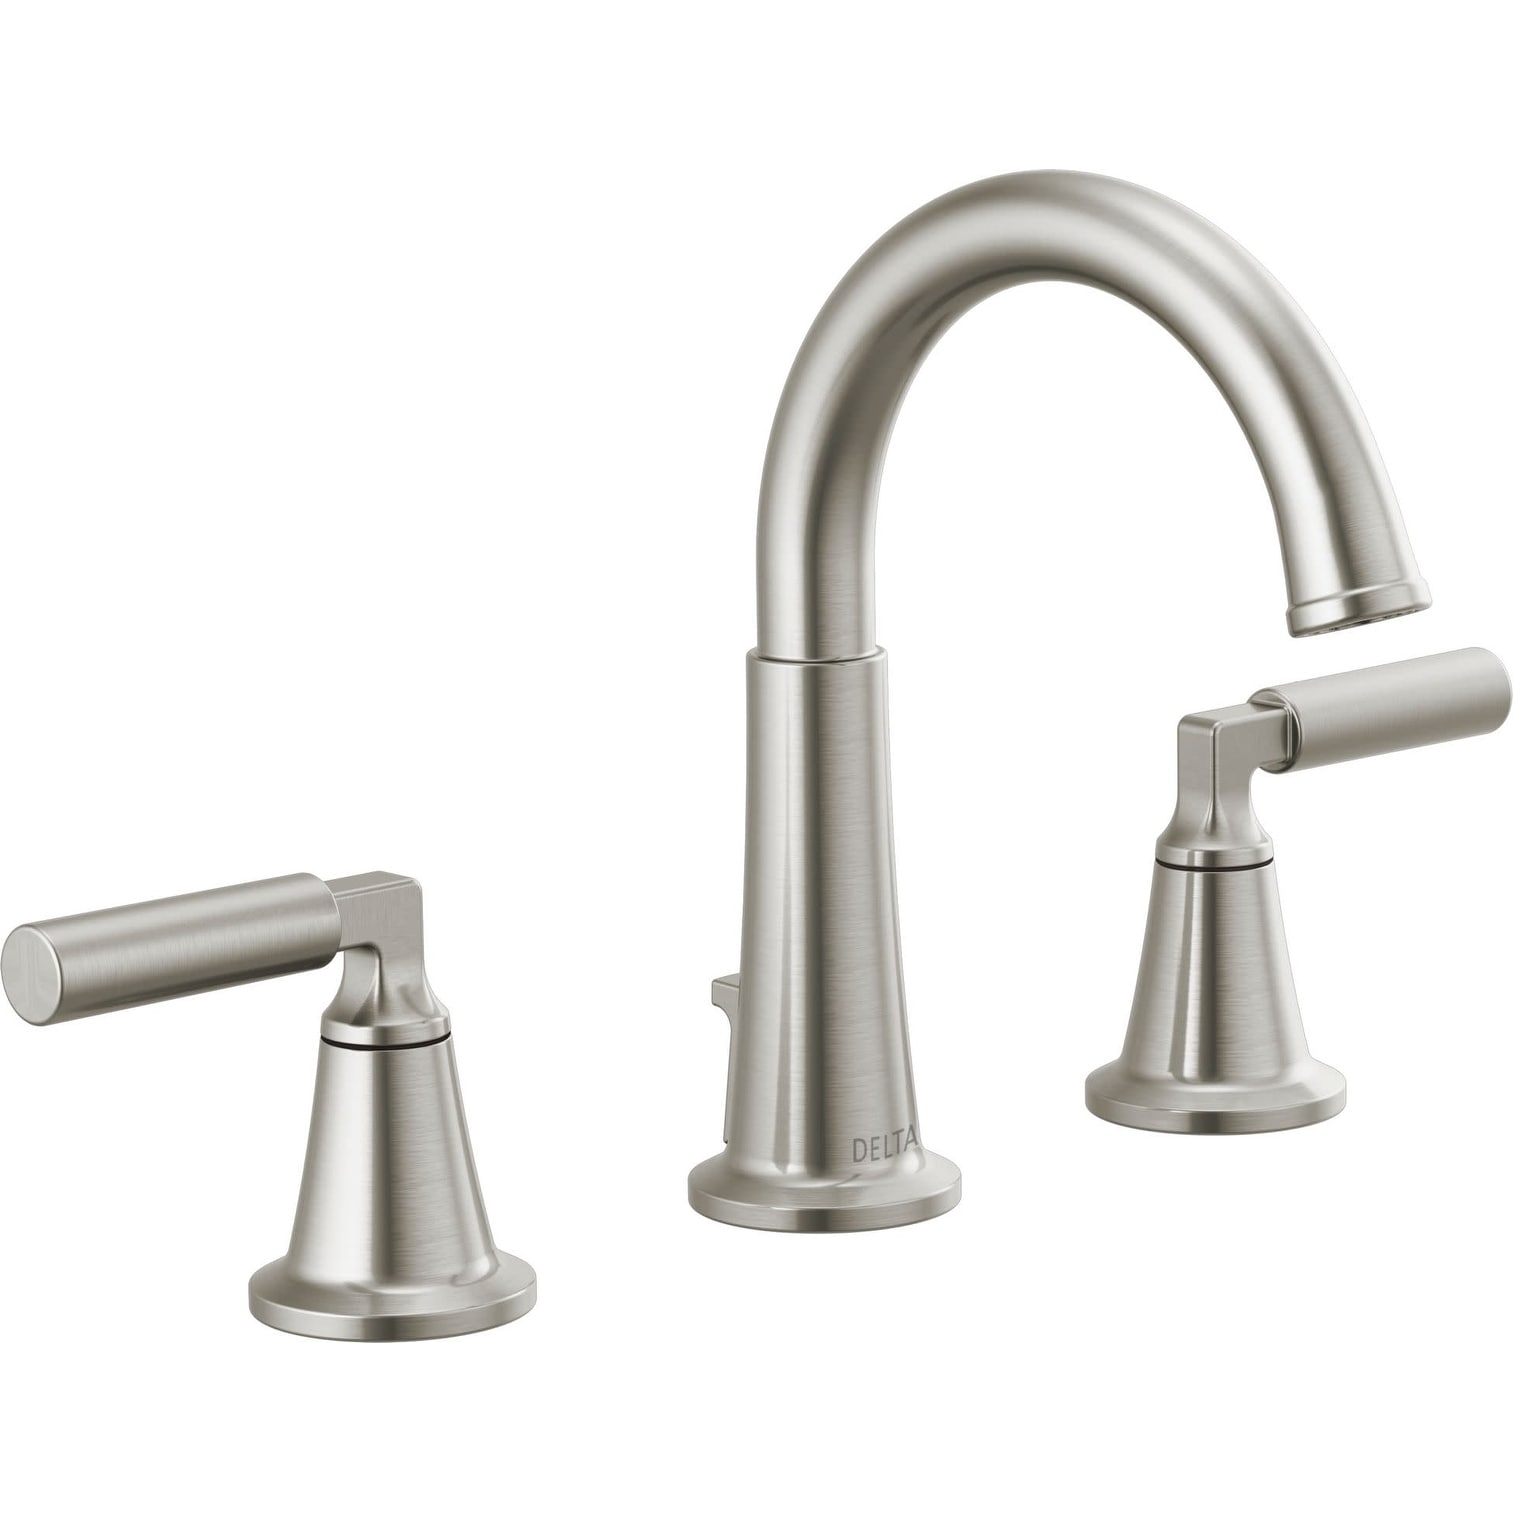 Delta Bowery 1.2 GPM Widespread Bathroom Faucet with Pop-Up Drain